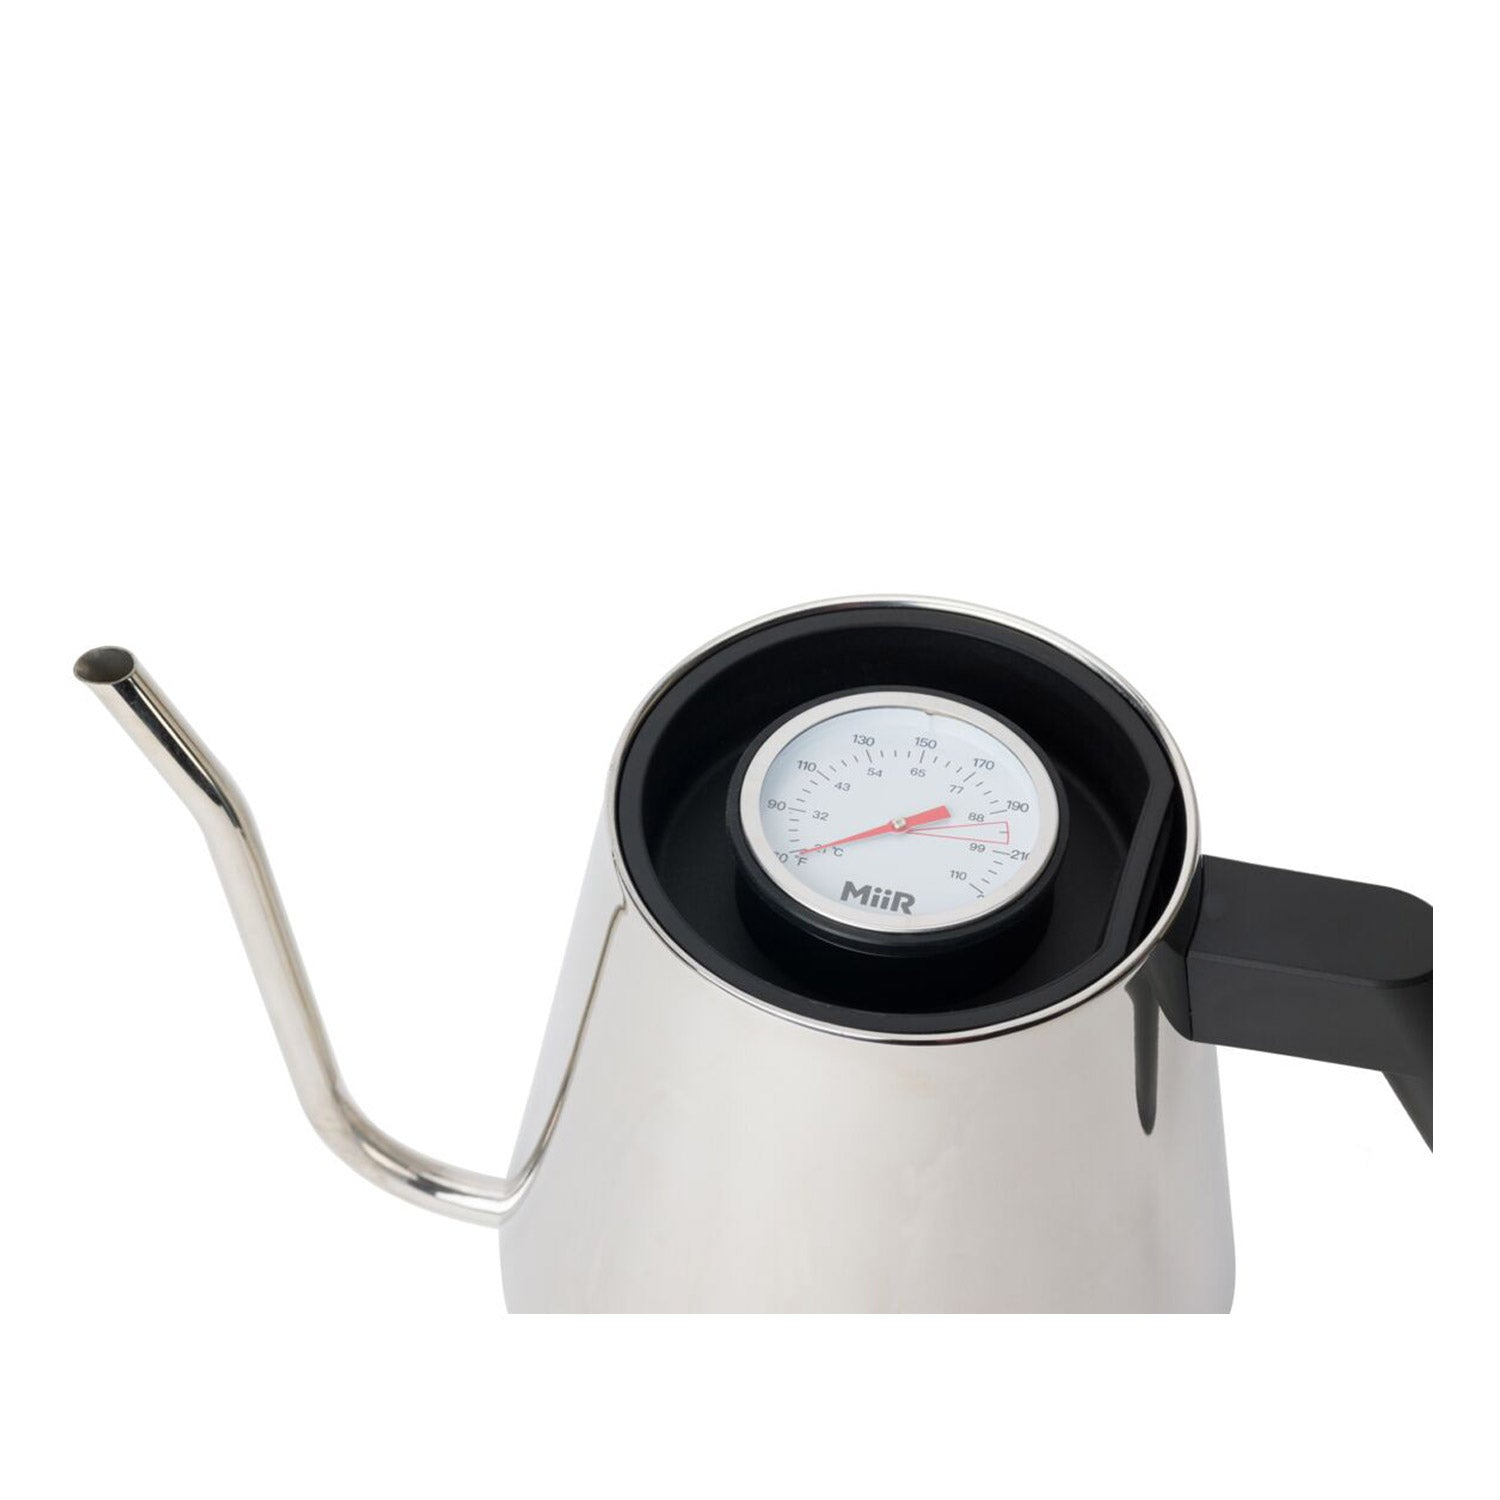 Portable Travel Camping Pour Over Coffee Kettle with Thermometer